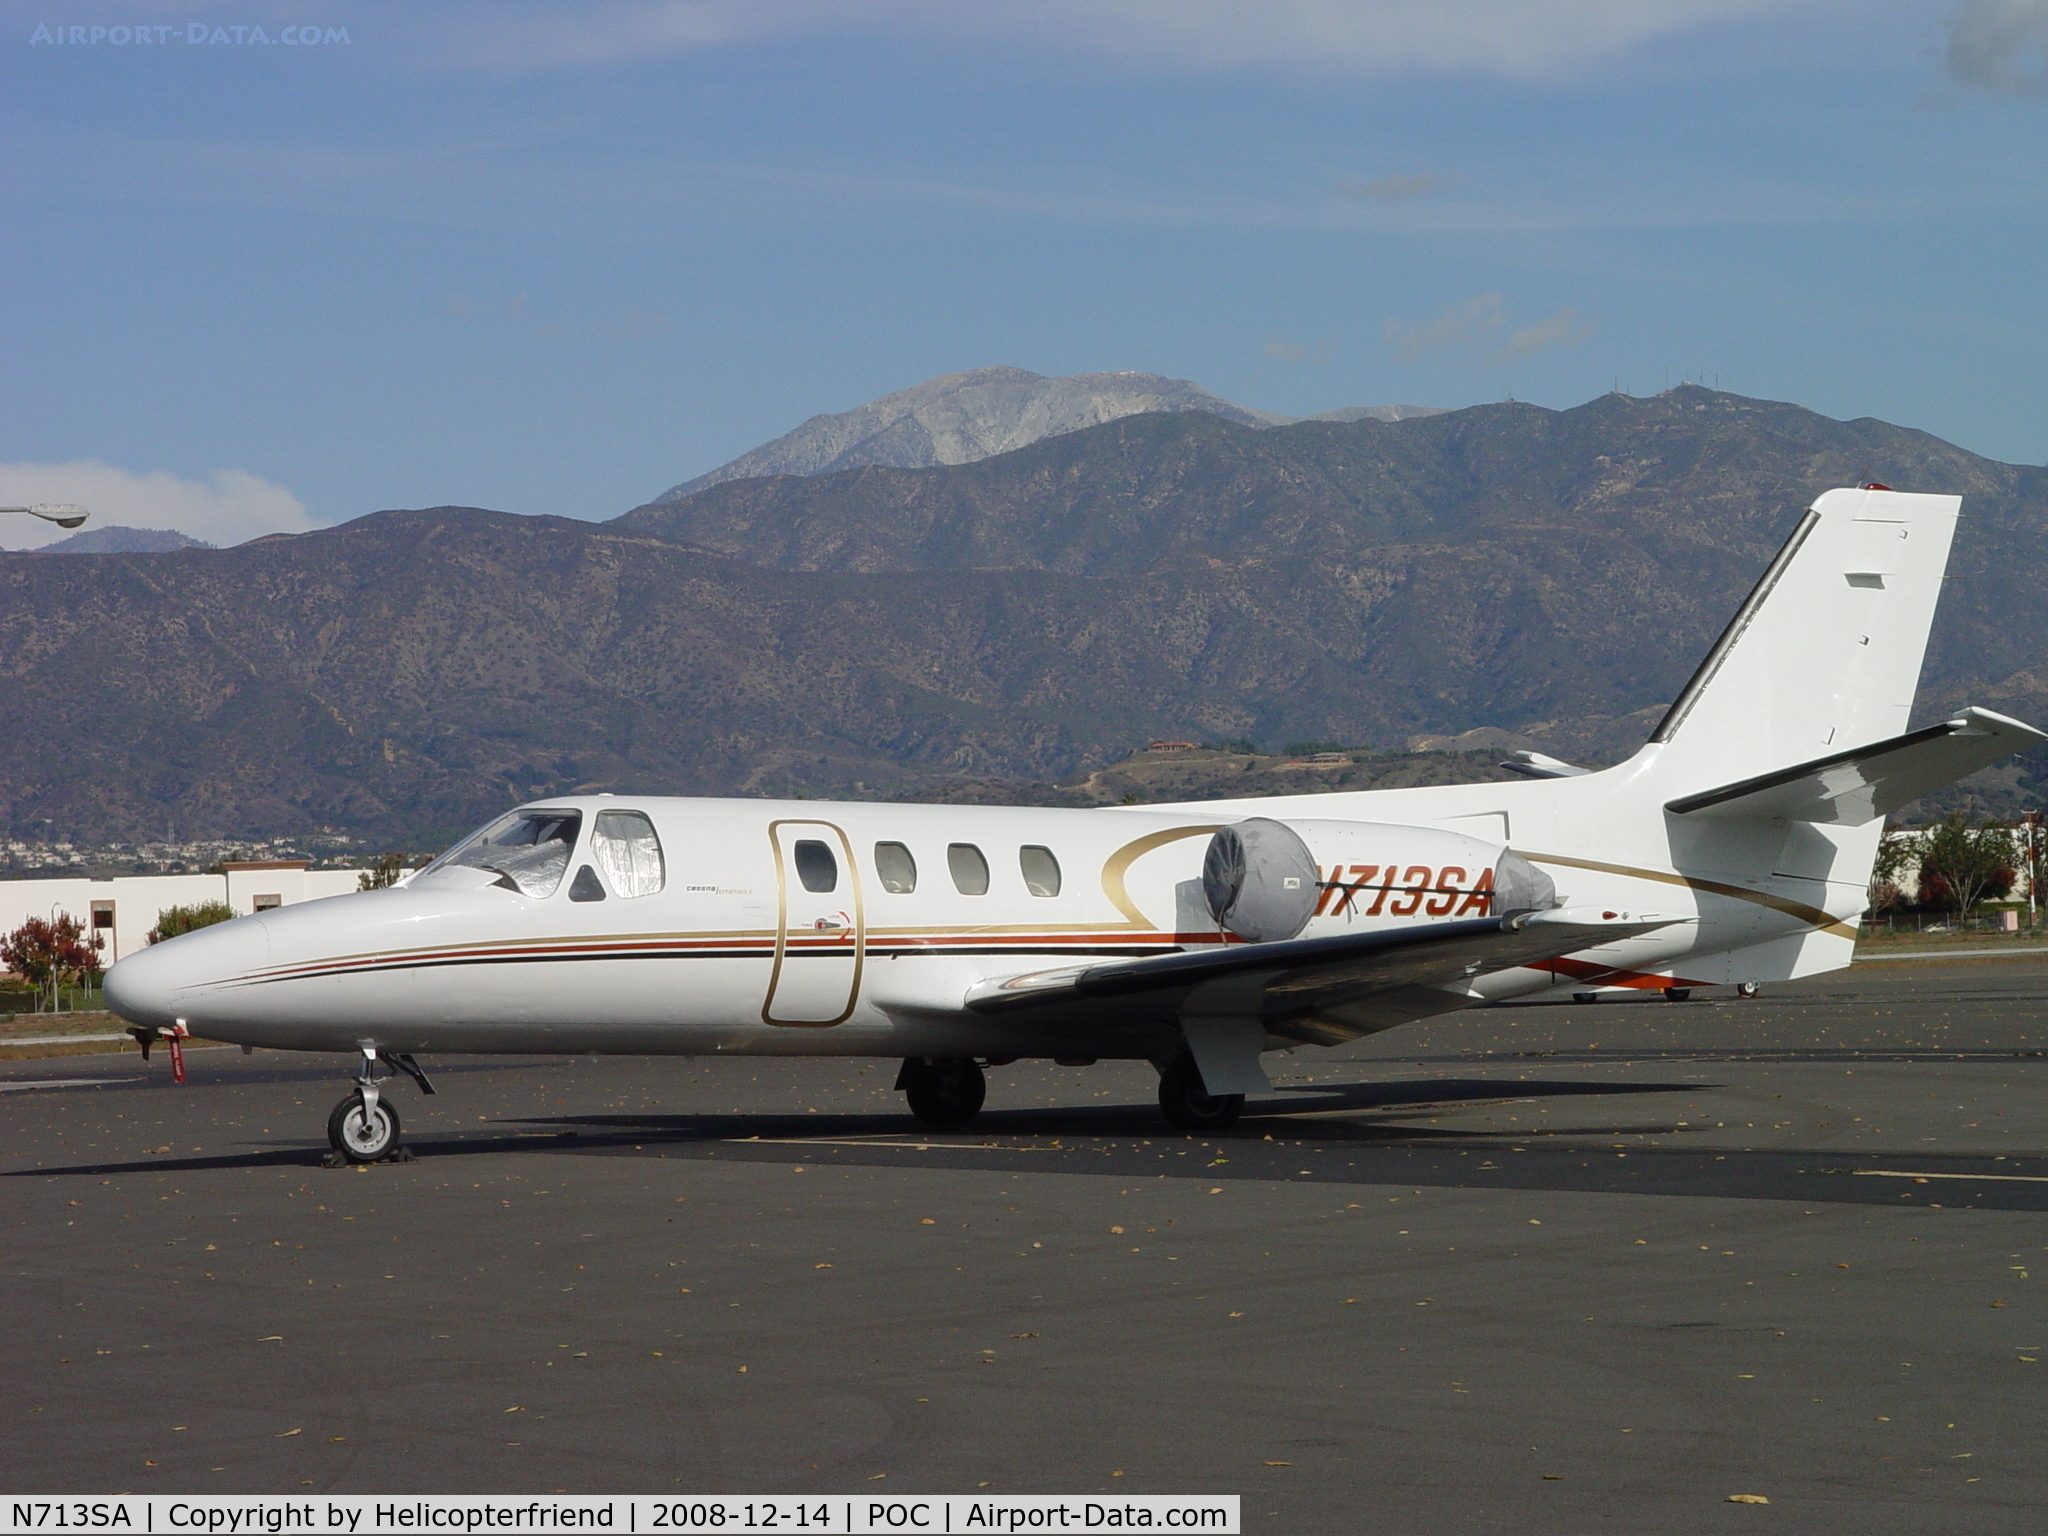 N713SA, 1973 Cessna 500 C/N 500-0132, Parked and covered at Brackett Transient Parking